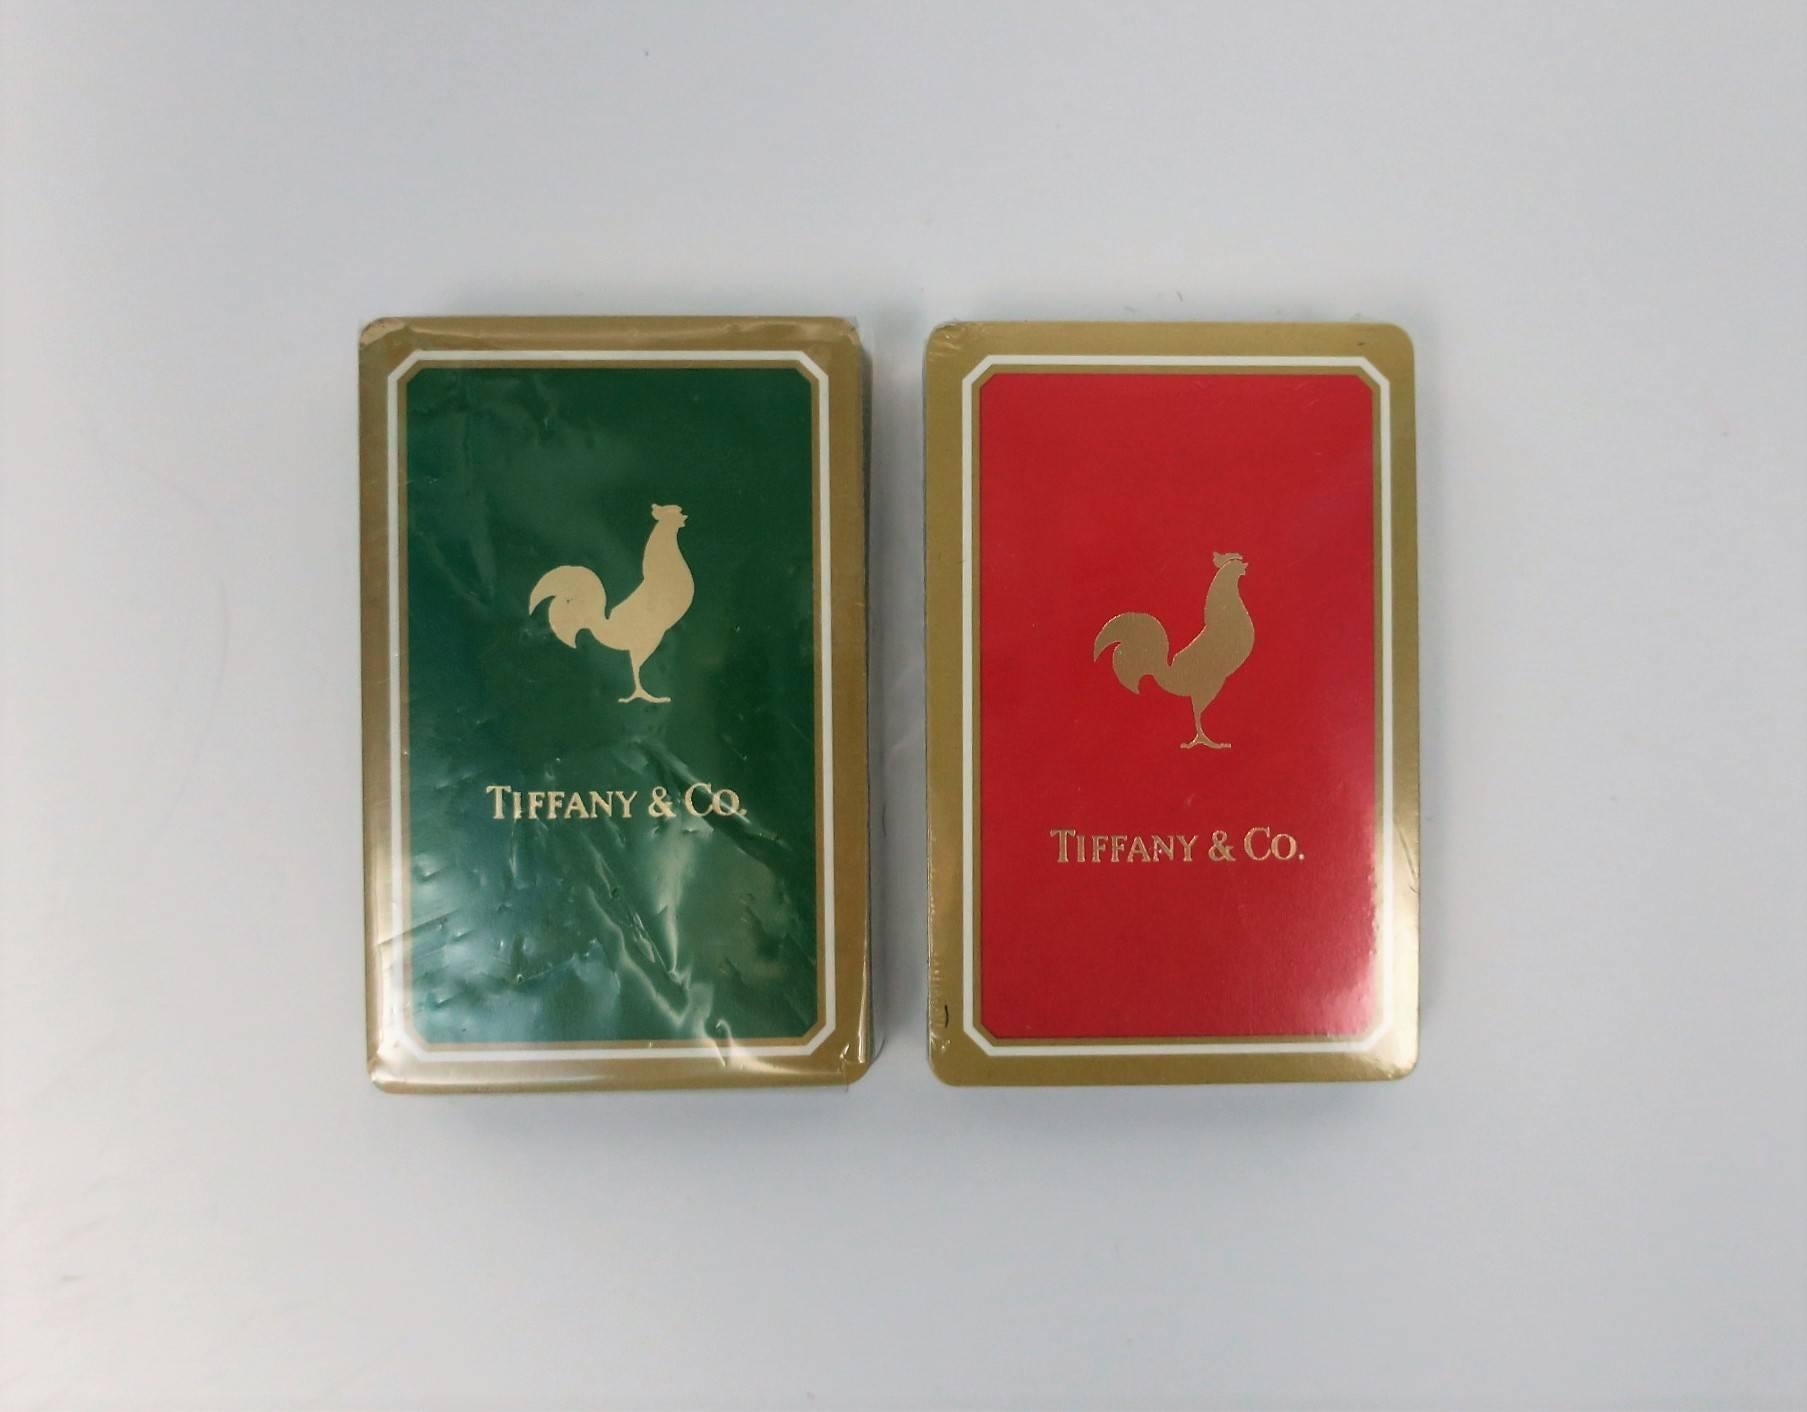 Vintage iconic Tiffany & Co. game playing card set with rooster design. Set contains two decks of cards; one in green and gold, the other, red and gold. Both deck of cards are in original wrapping and have never been used. Set is with original